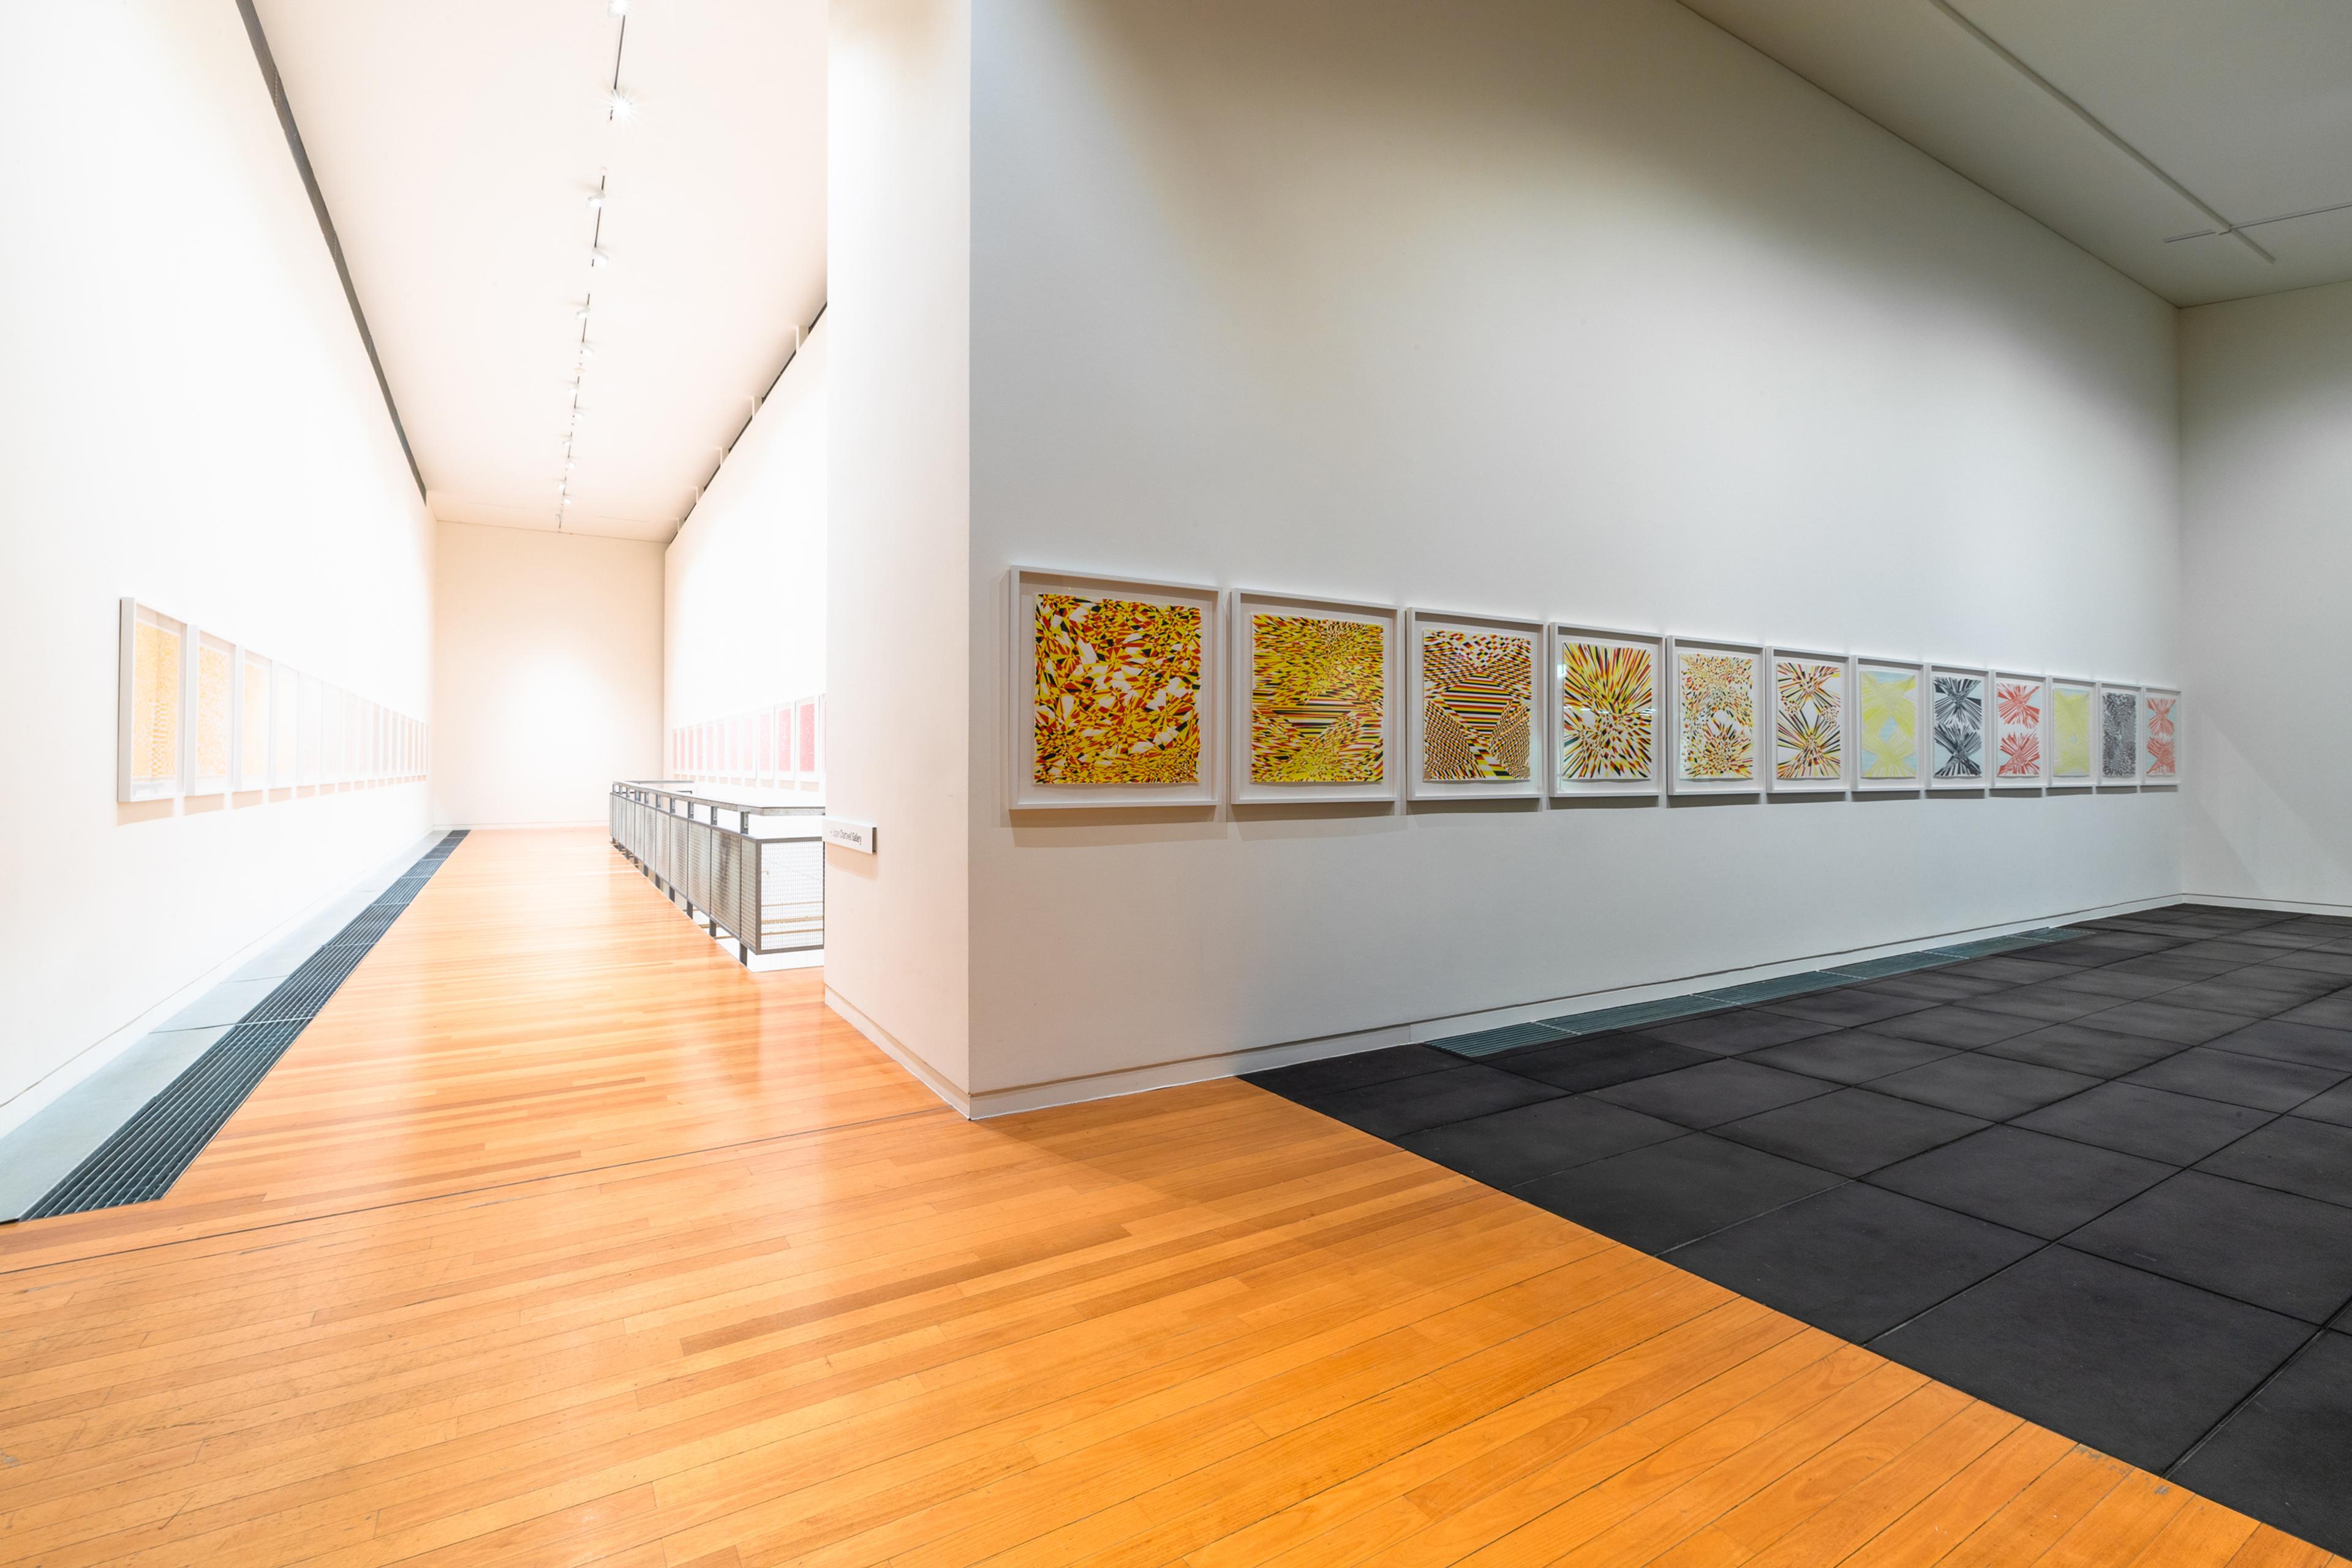 Installation view of Energy Work: Kathy Barry , Te Pātaka Toi Adam Art Gallery, Wellington, 13 July – 25 September 2022. Photo by Ted Whitaker.